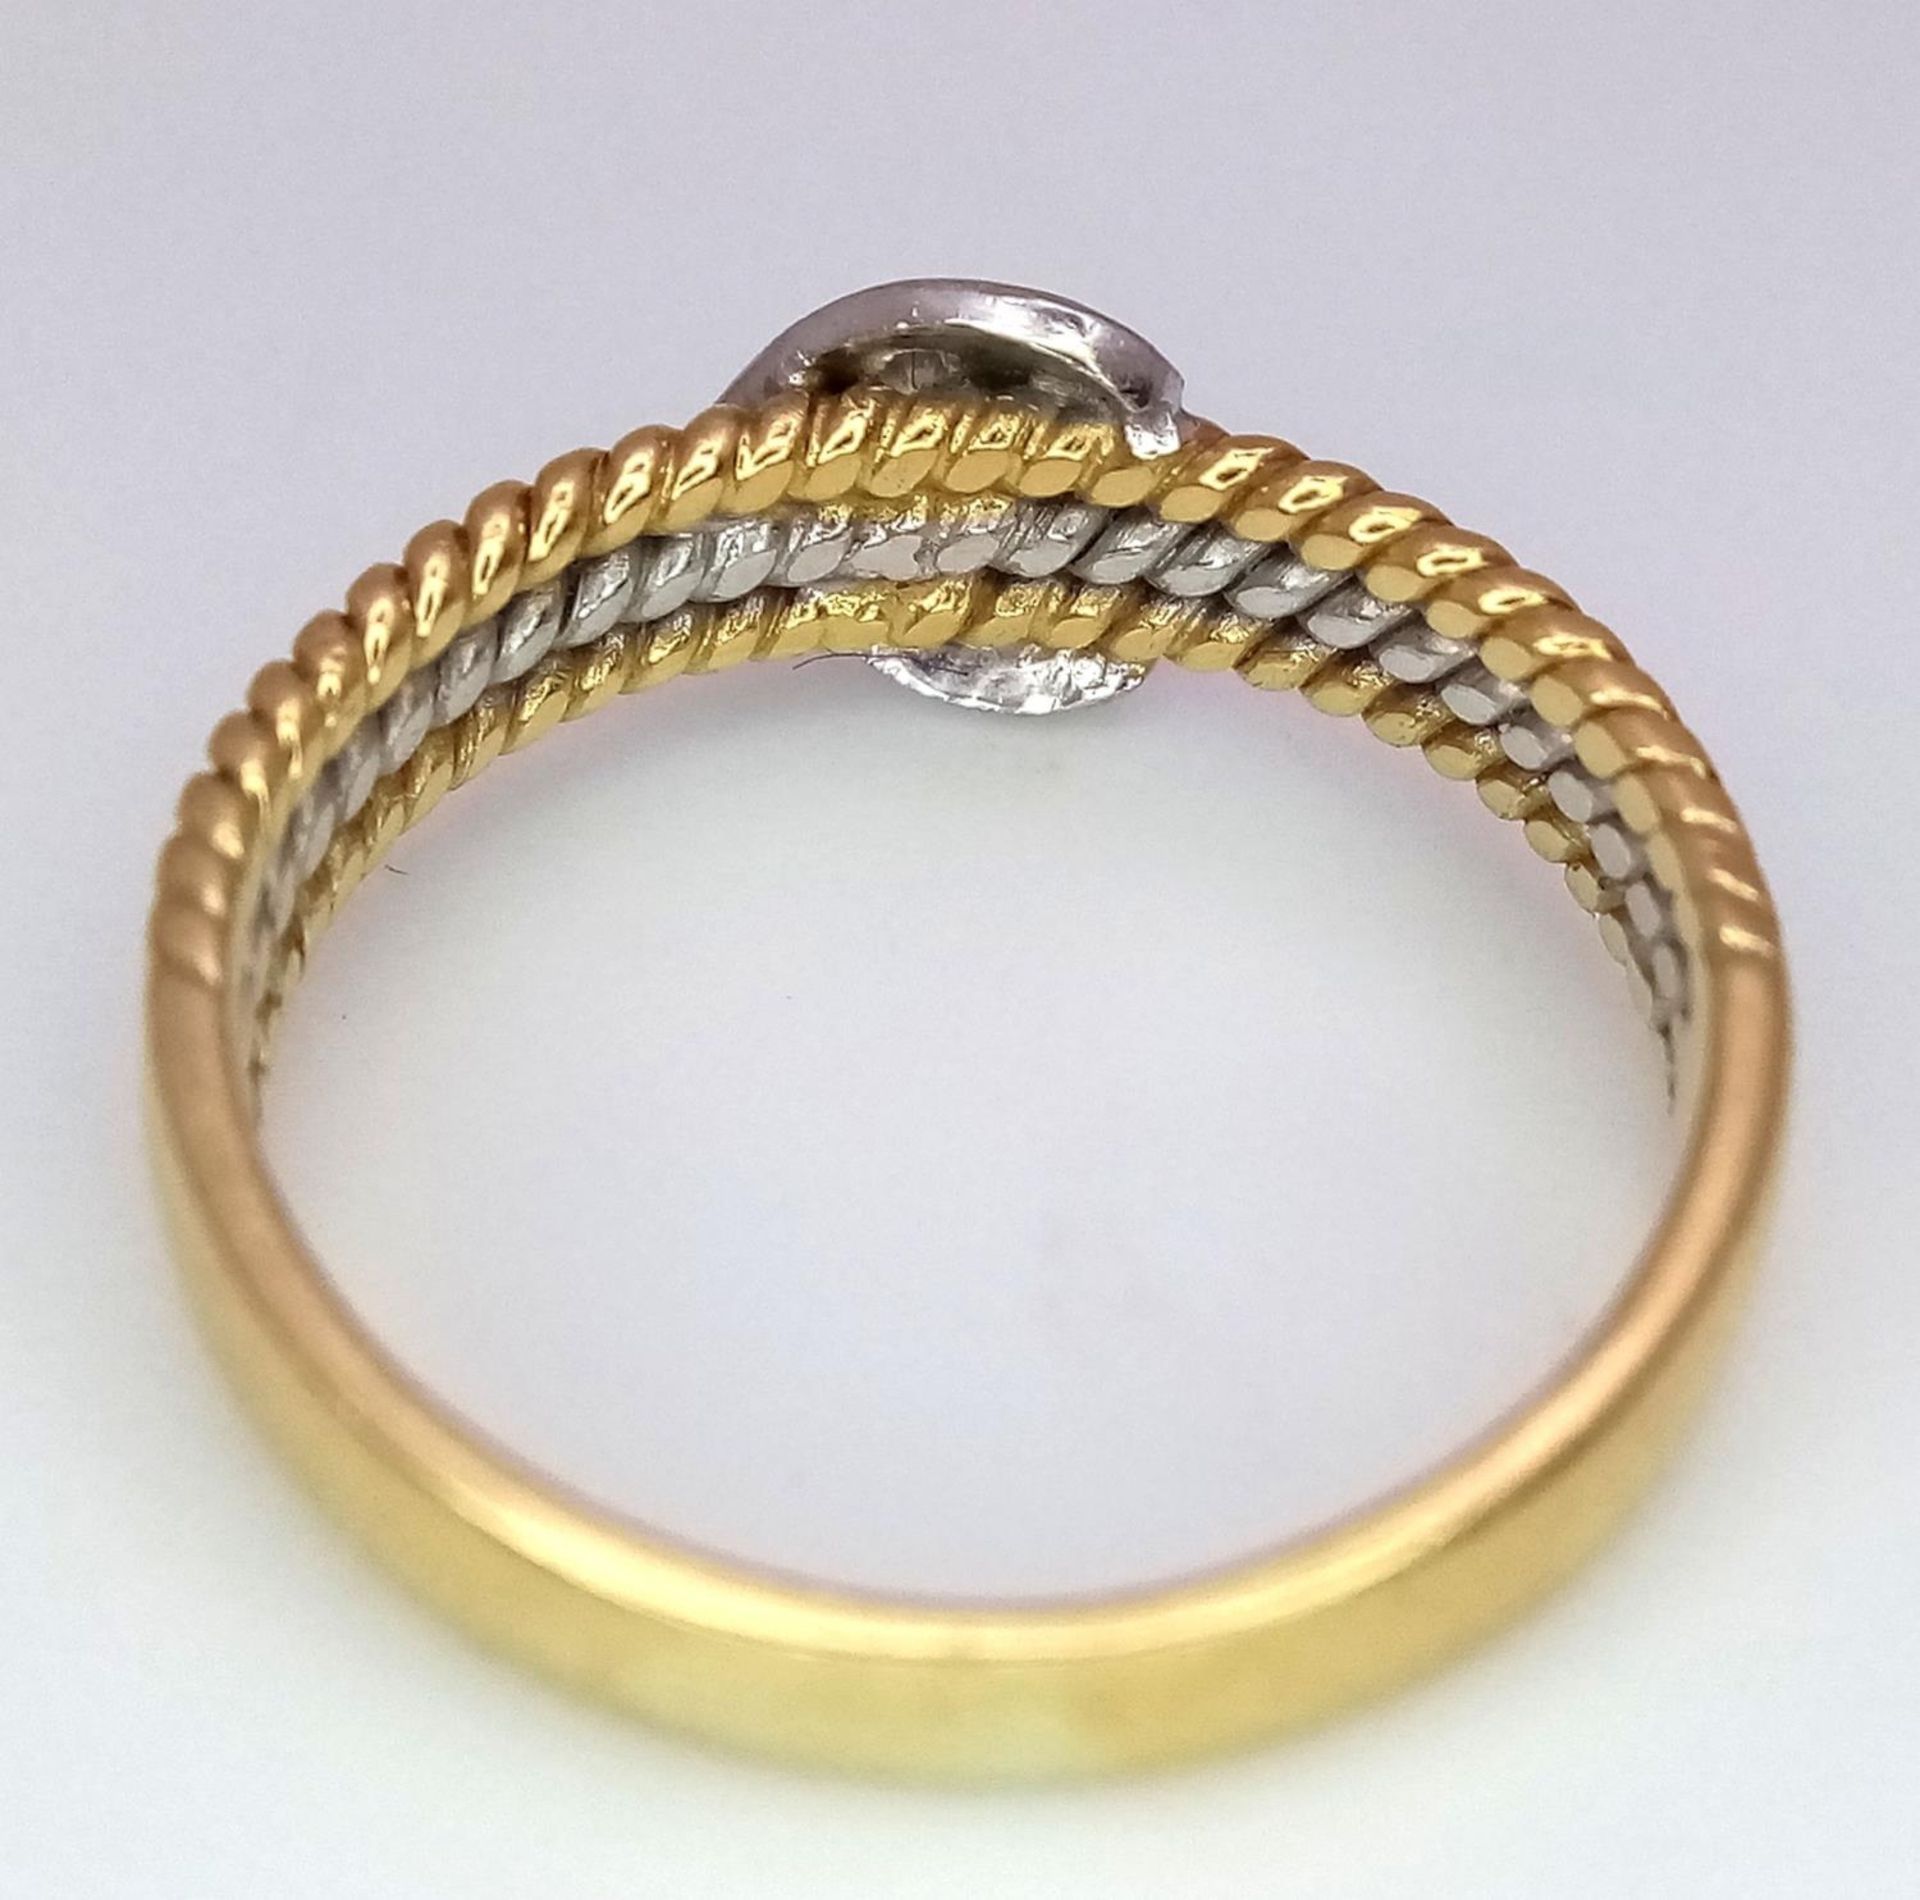 An 18K White and Yellow Gold, Diamond Crescent Ring. Size K. 2.85g total weight. - Image 4 of 5